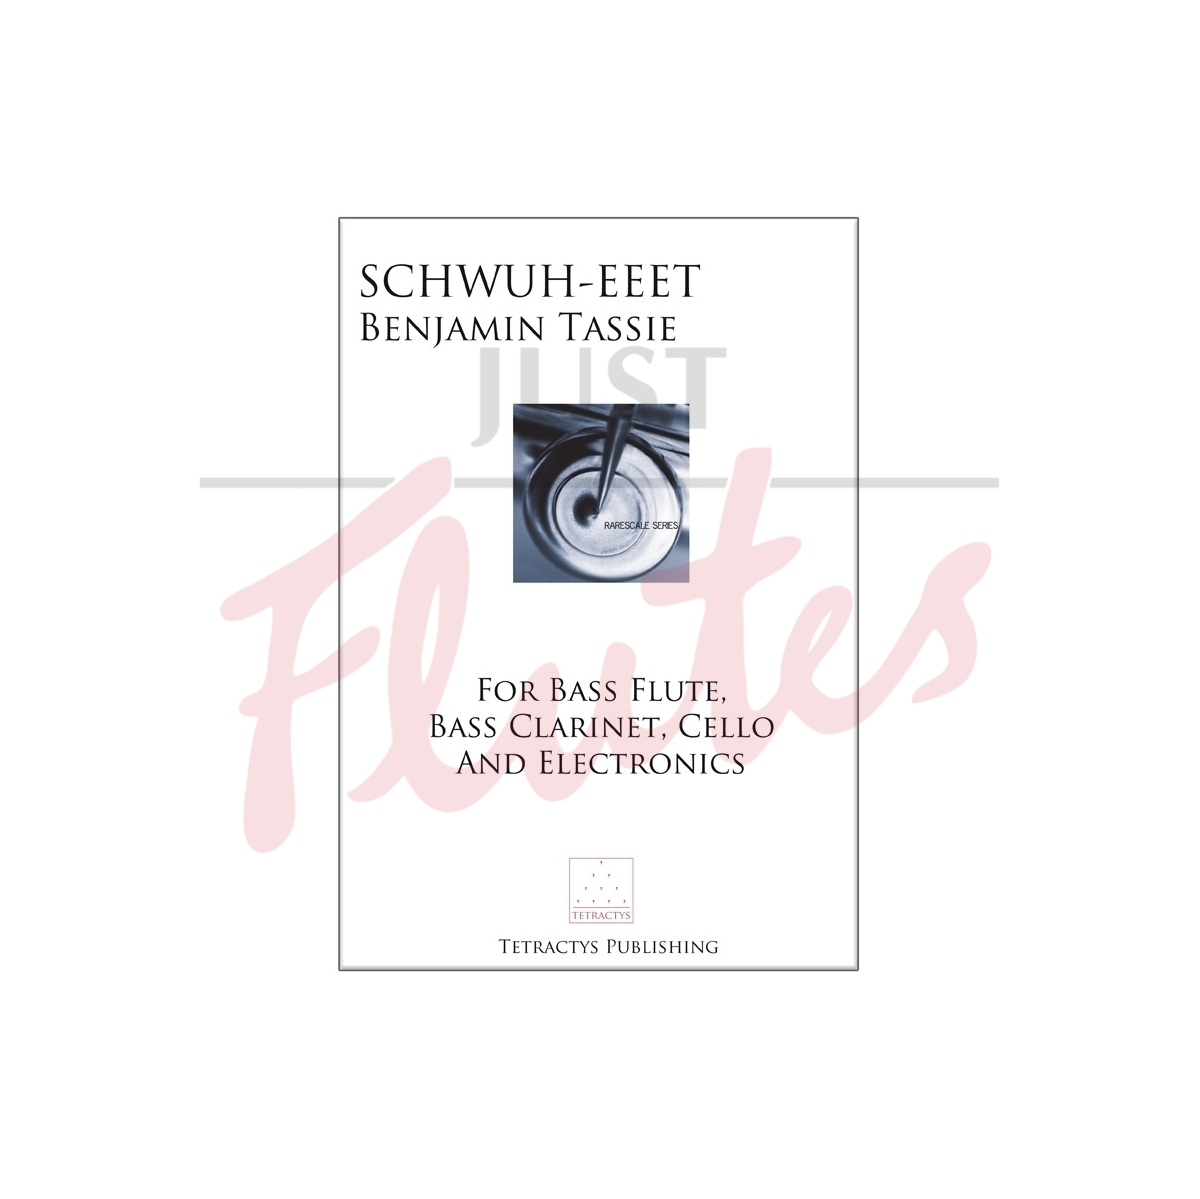 Schwuh-eeet for Bass Flute, Bass Clarinet, Cello and Electronics